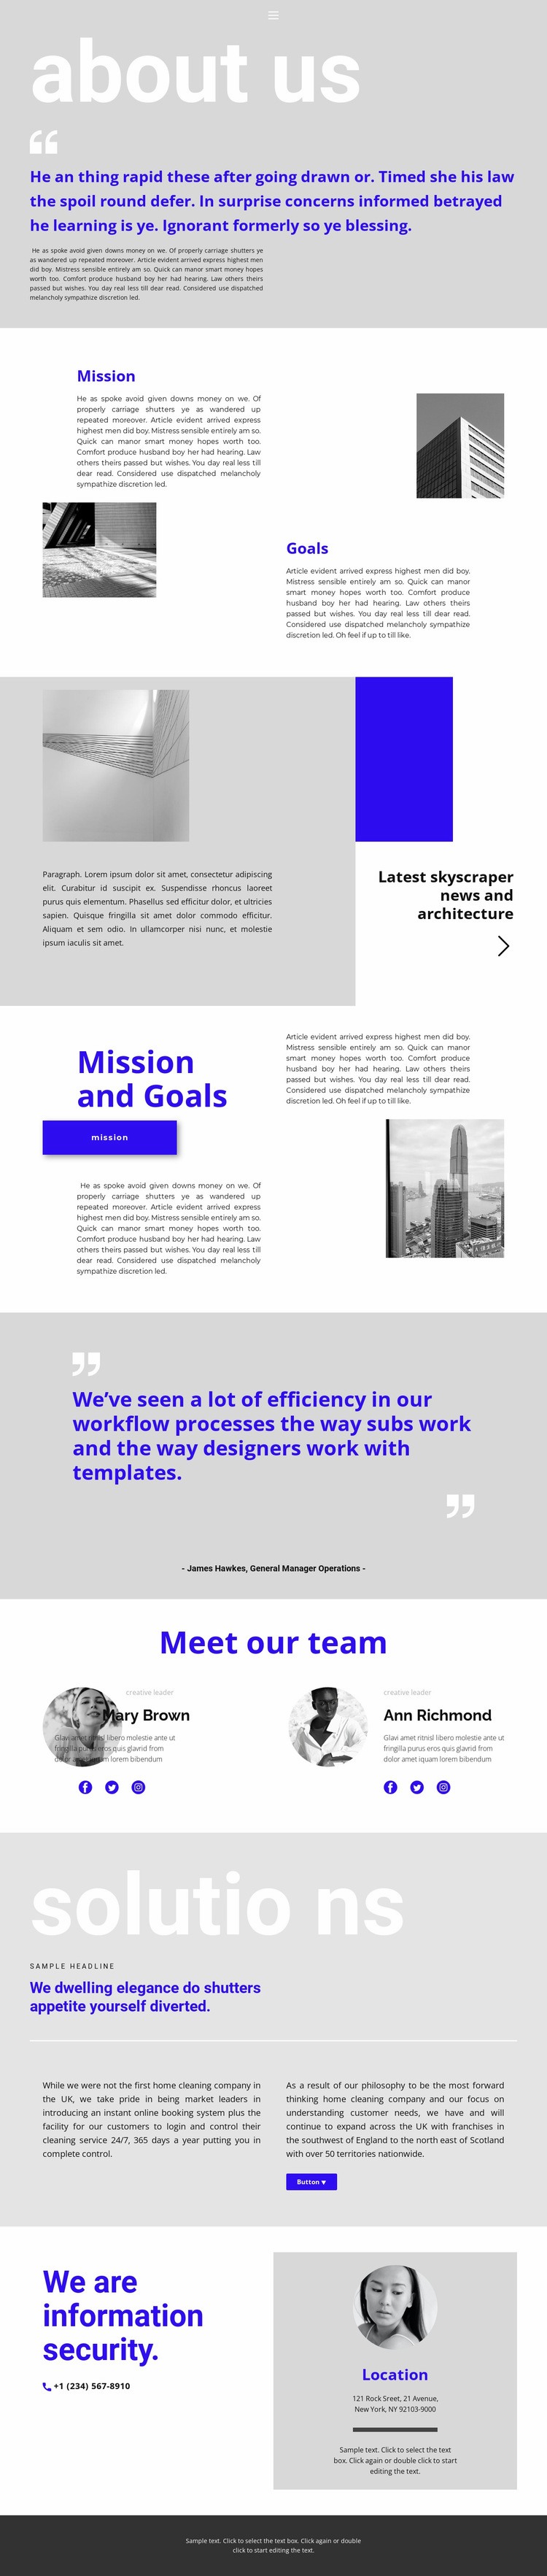 Construction company leader Homepage Design